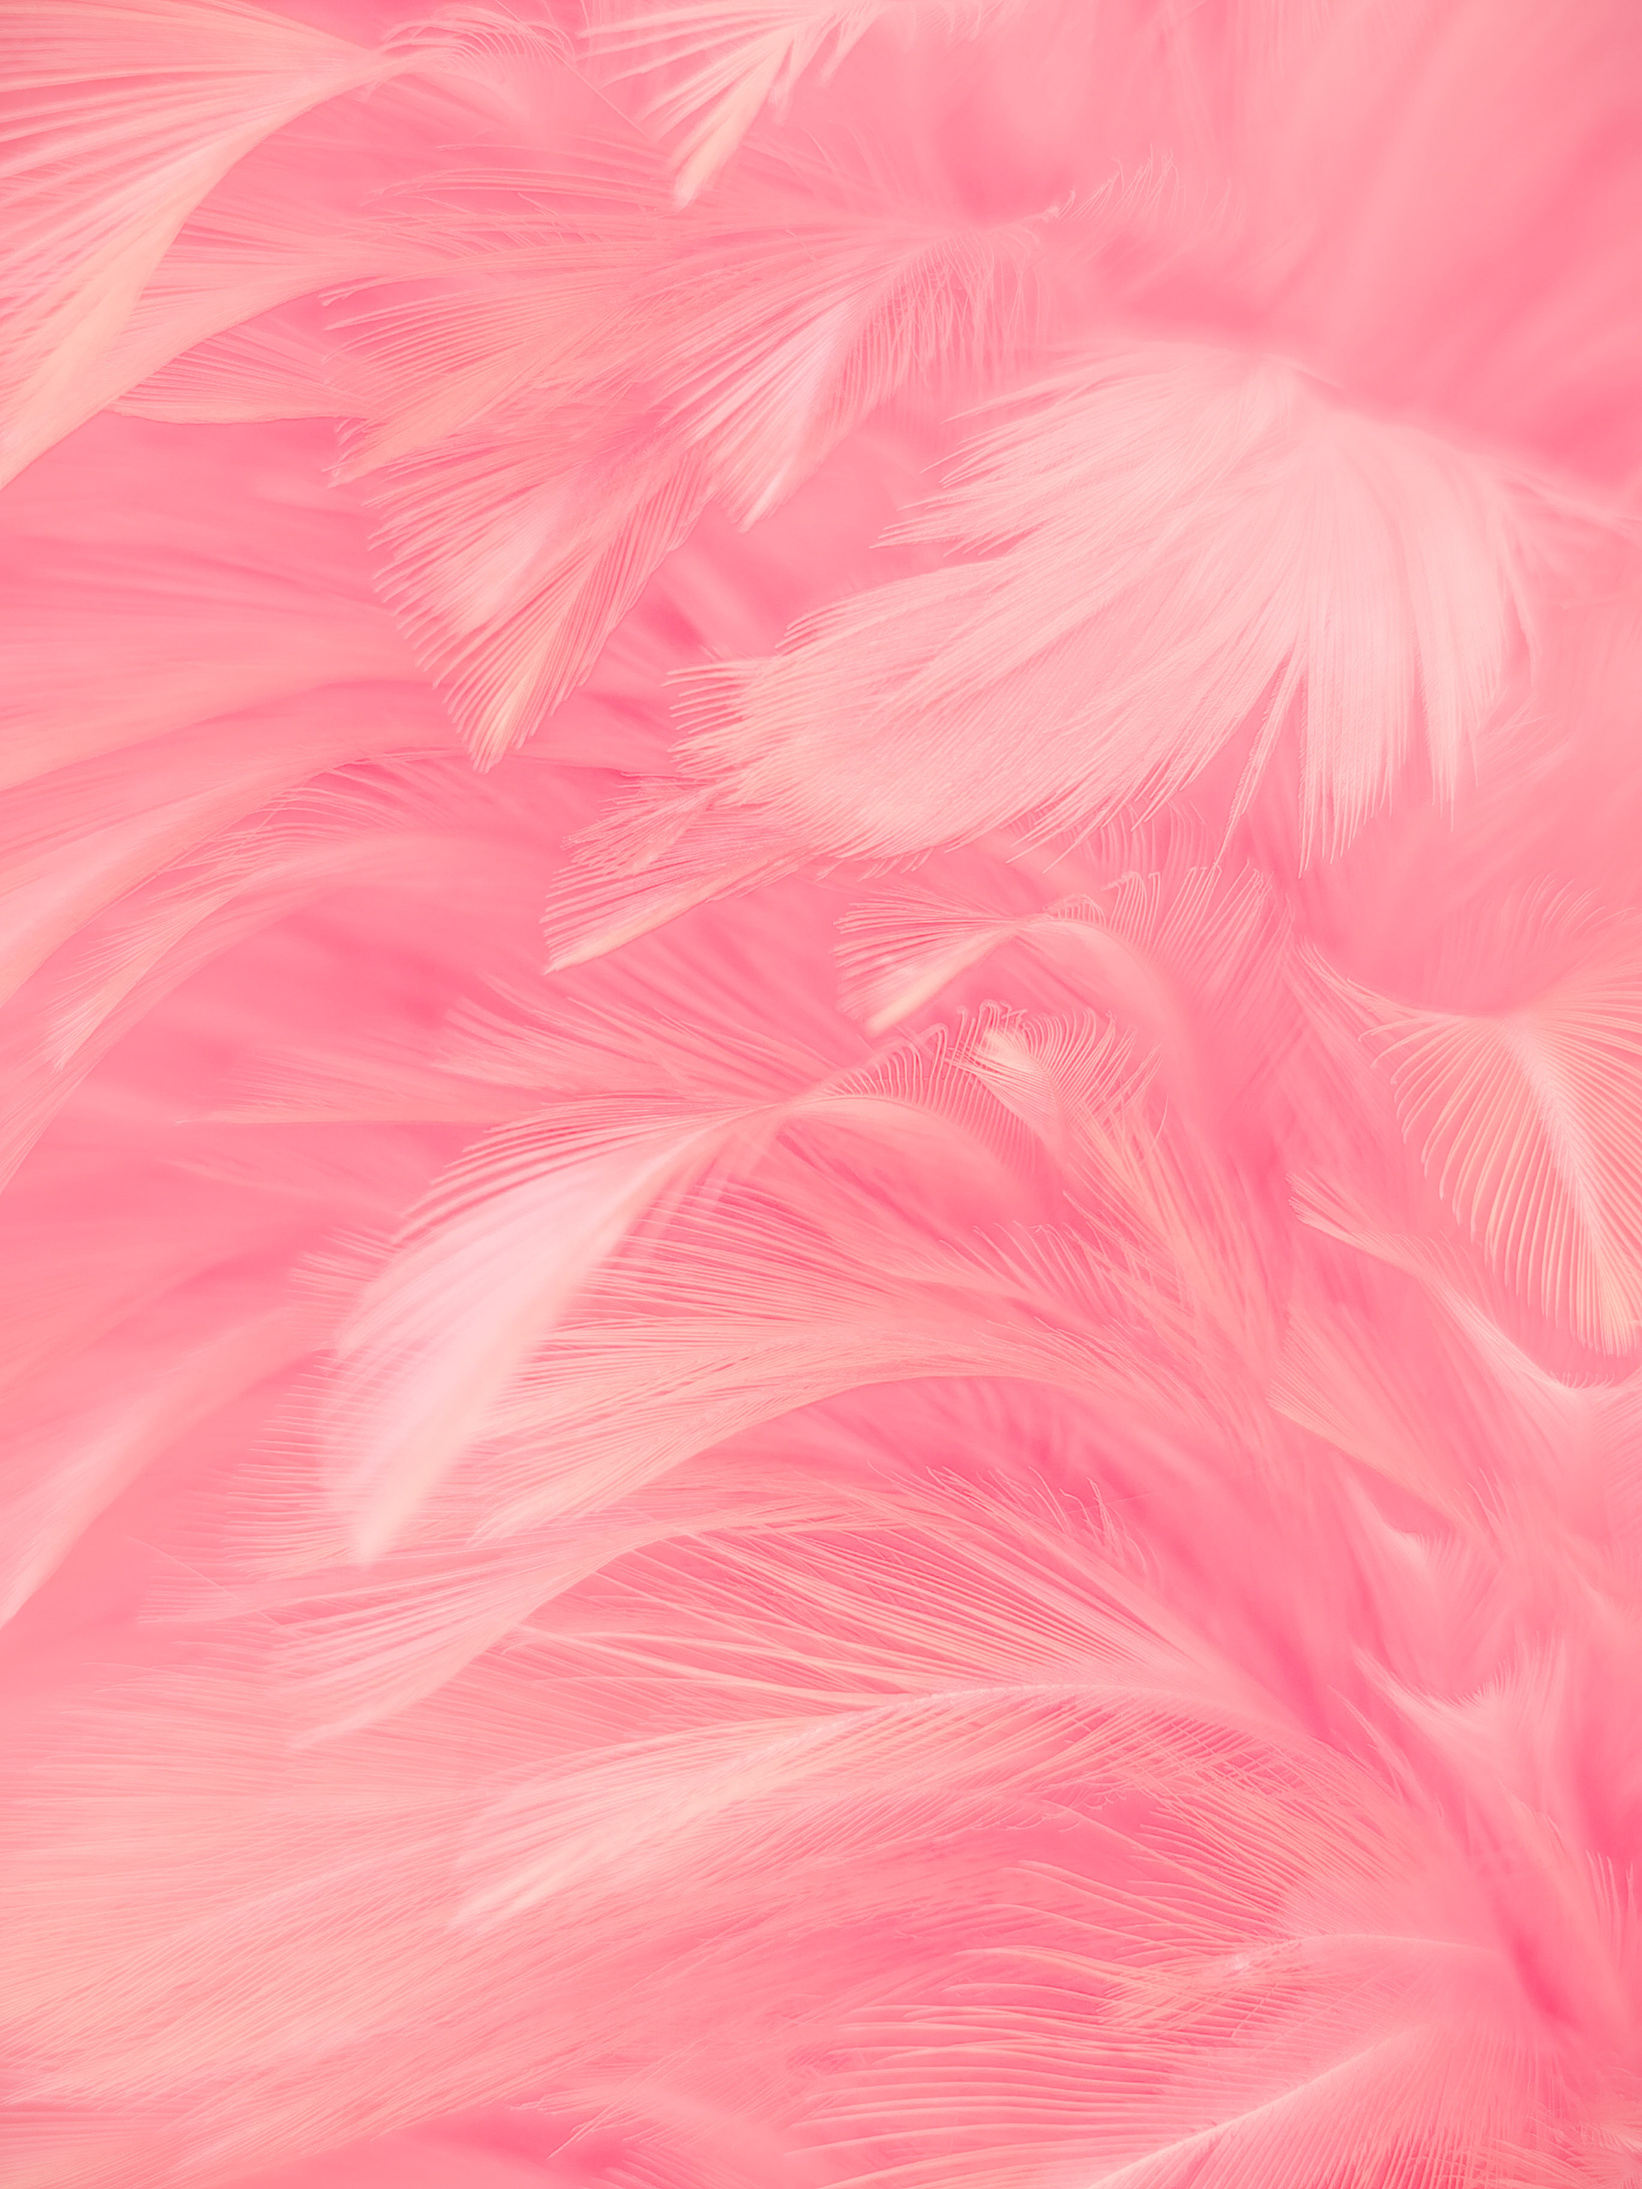 Beautiful abstract gray and pink feathers on white background,  white feather frame texture on pink pattern and pink background